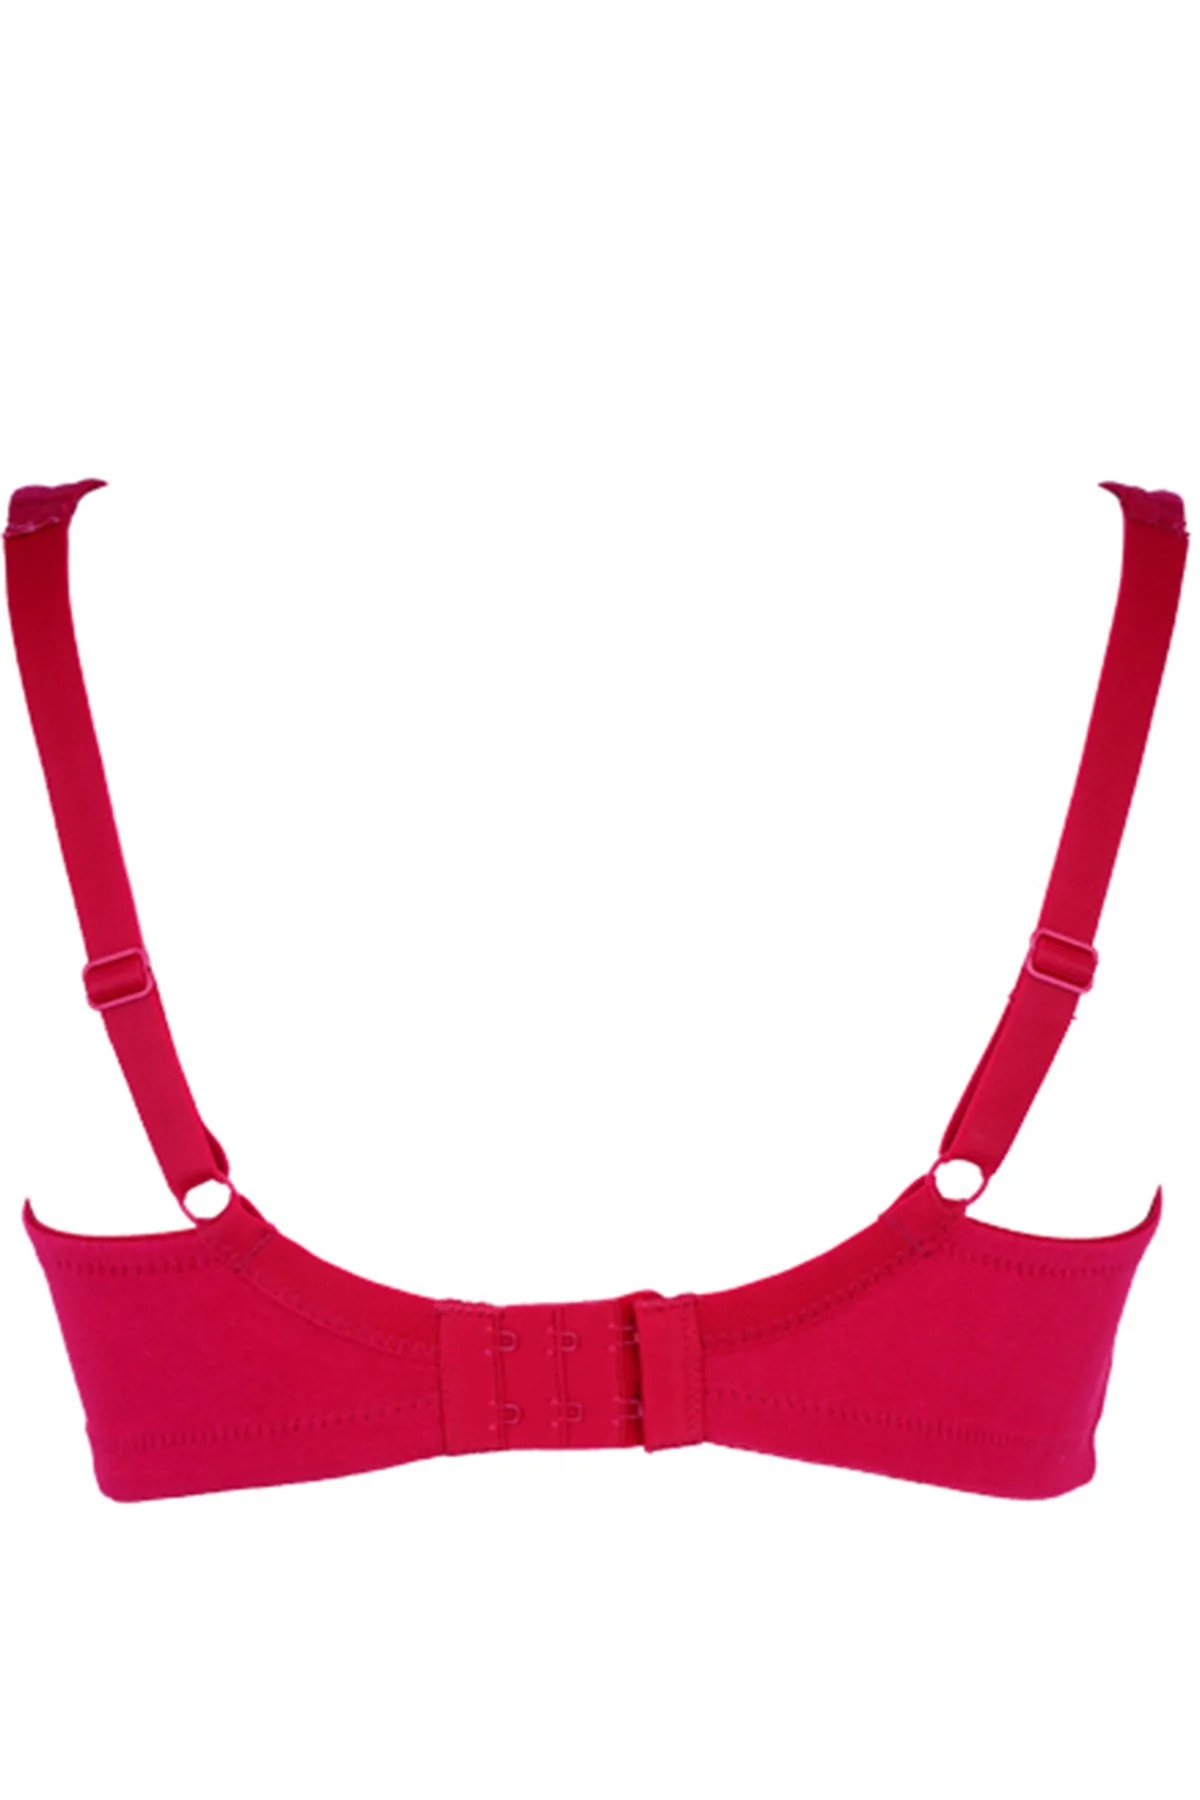 Bls - Cece Non Wired And Non Paded Bra Burgundy - Highfy.pk